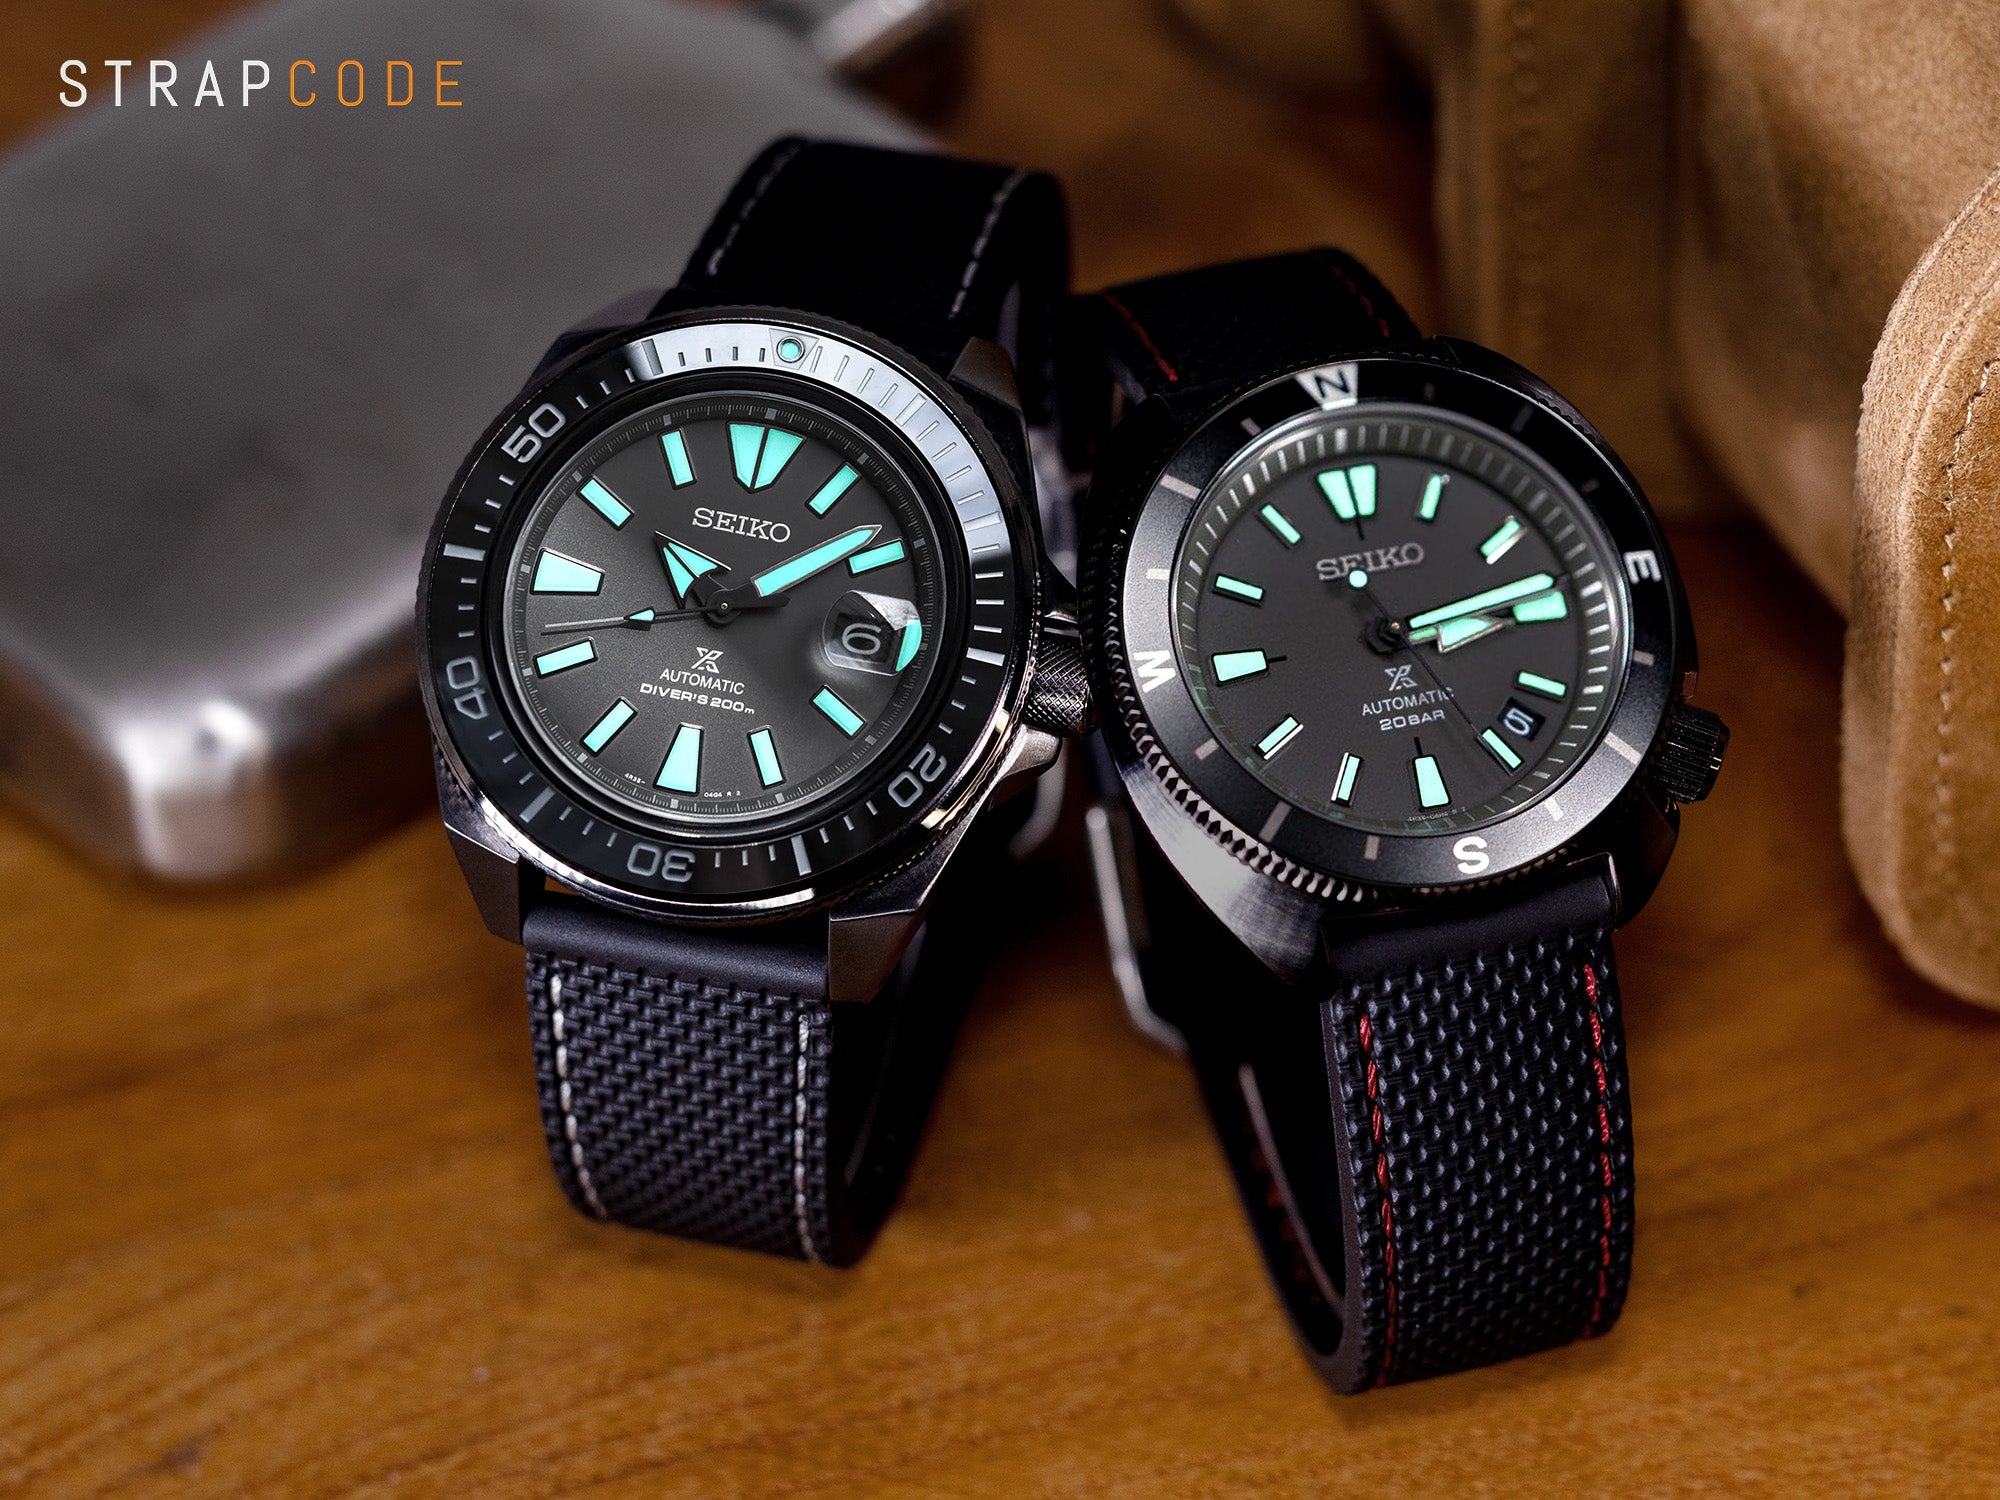 Crafter Blue UX05 Q.R. Performance FKM Rubber Strap